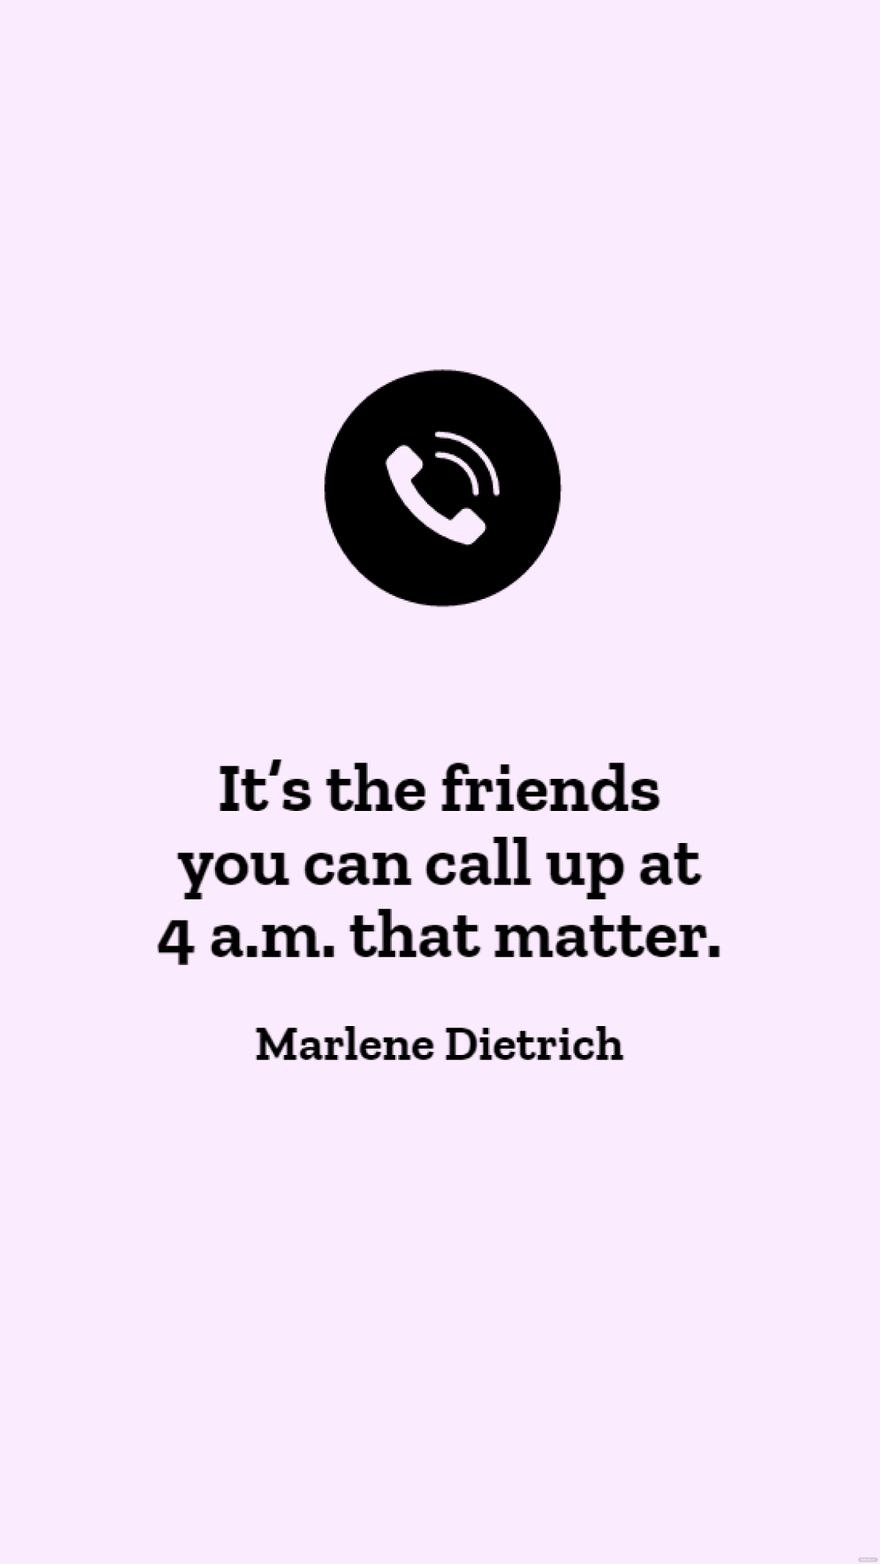 Marlene Dietrich - It’s the friends you can call up at 4 a.m. that matter.